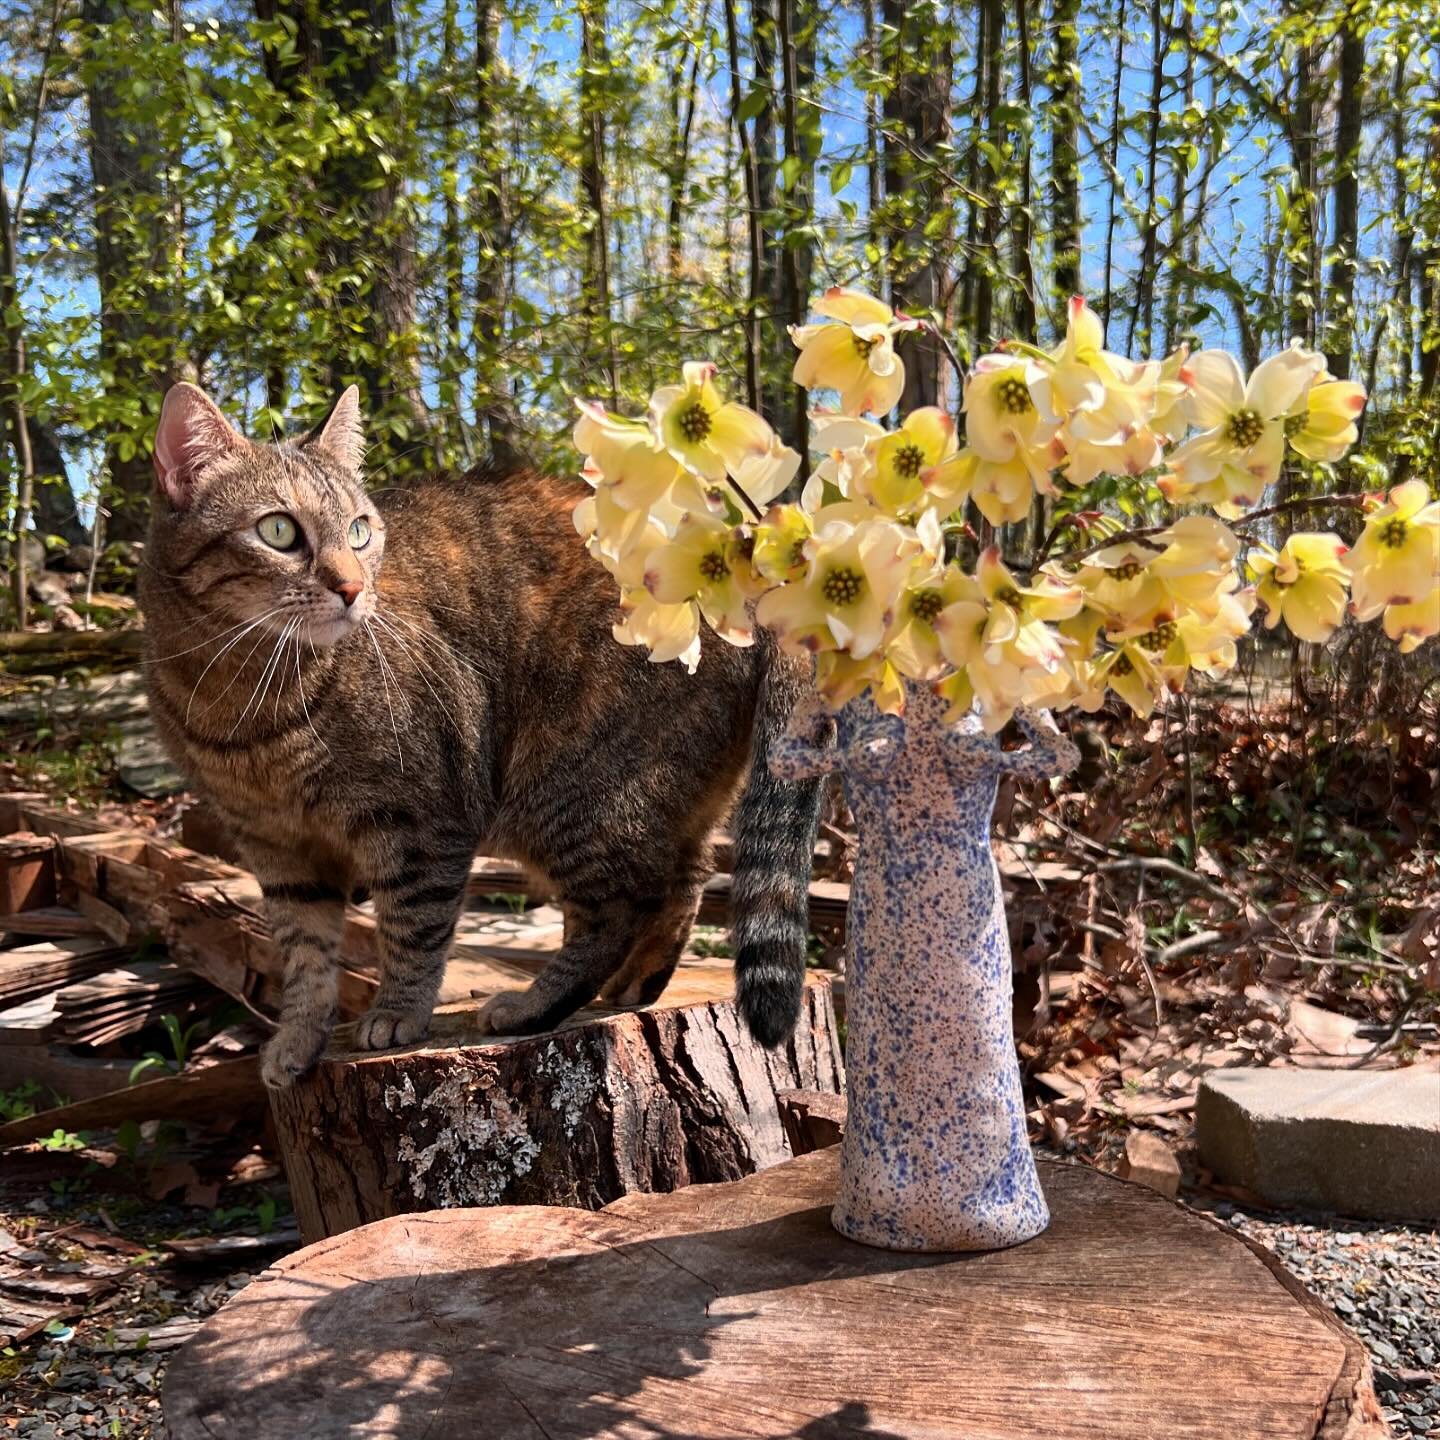 Peanut and Feeling Myself Vase full of dogwood flowers. Trying to remember my body is a portal, art is a remedy, and things can change 
.
.
.
#feelingmyself #catmom #rescue #handmade #dogwood #spring